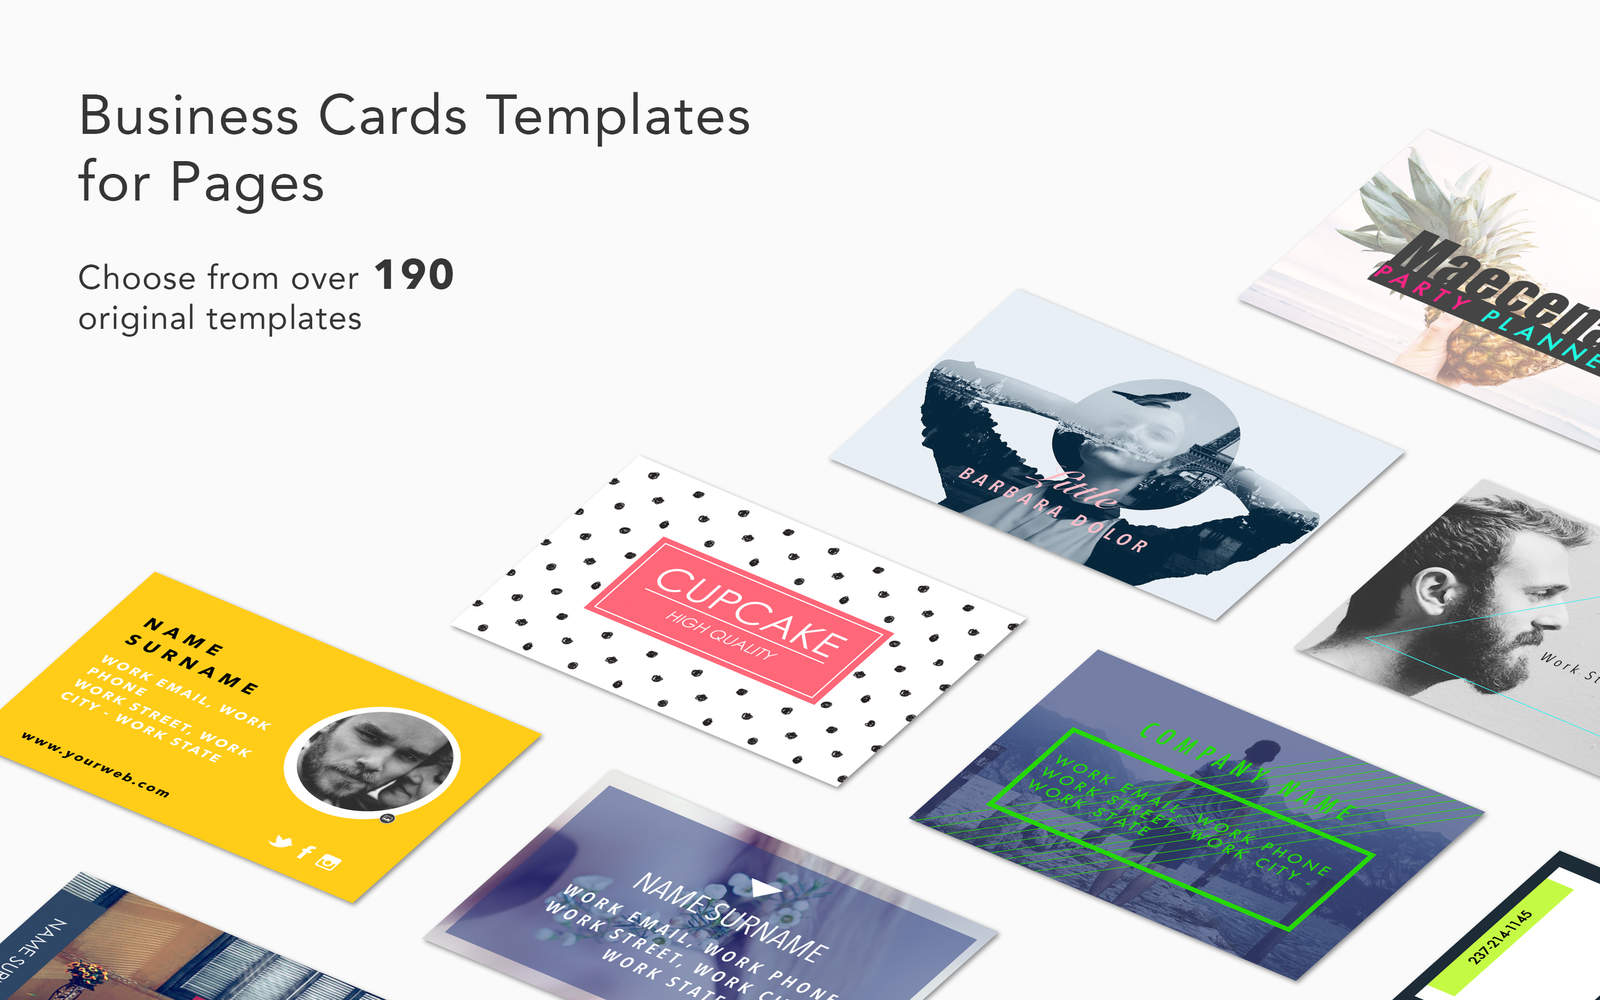 Business Cards Templates for Pages 1.2 : Main Window